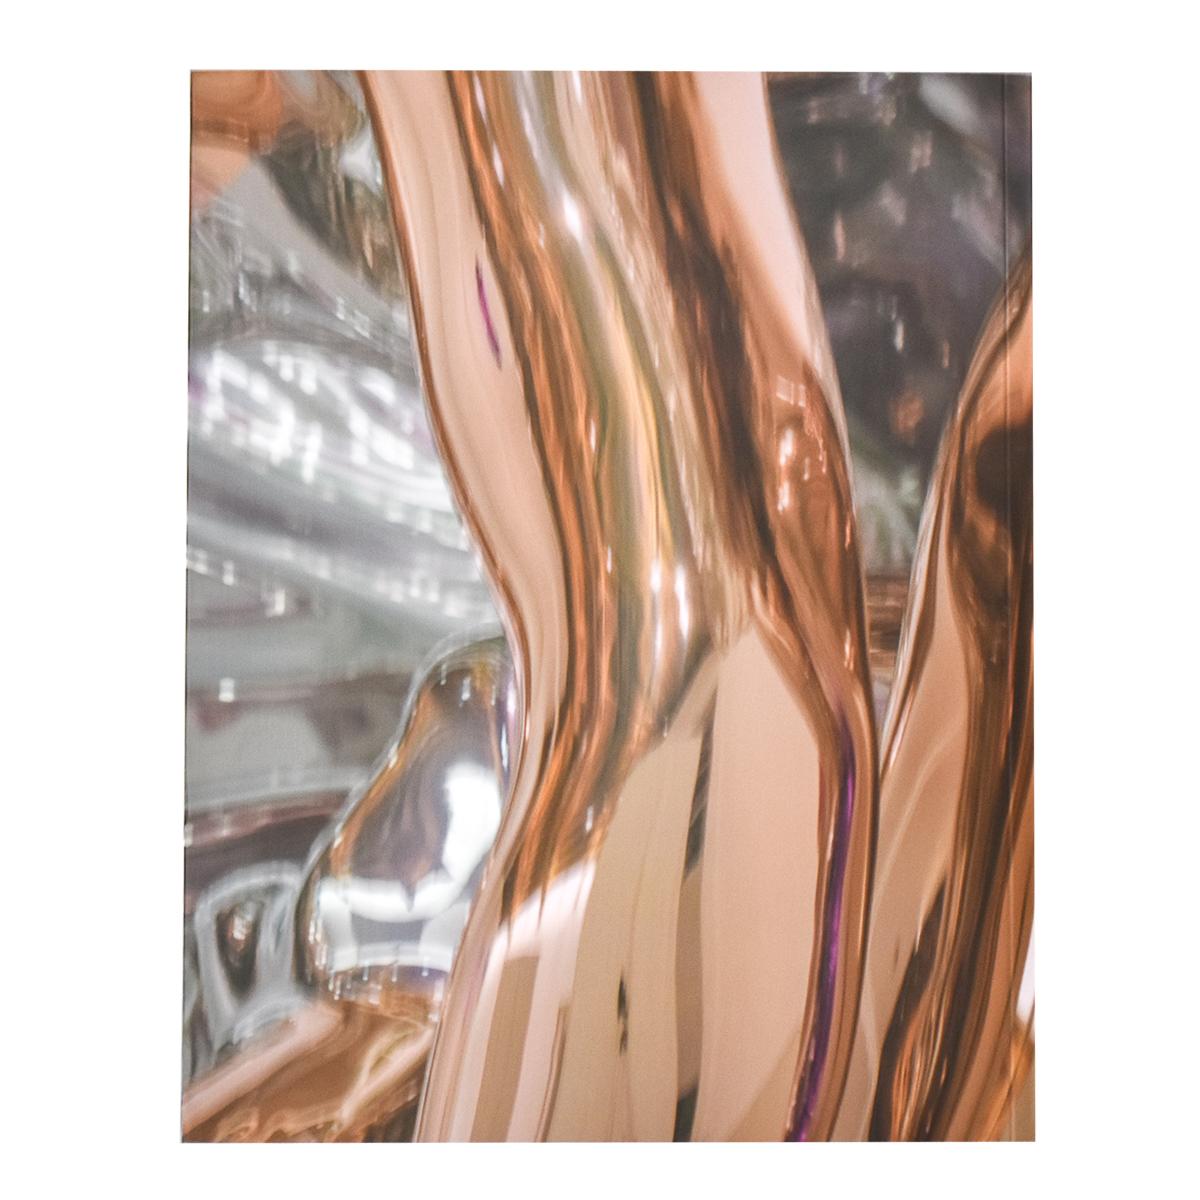 Hand signed by Jeff Koons on inside cover with date using silver marker.
Only a limited number of books were signed by Koons.
Released in 2019 on occasion of the exhibition by the artist at the museum.
Softback book in color with high gloss